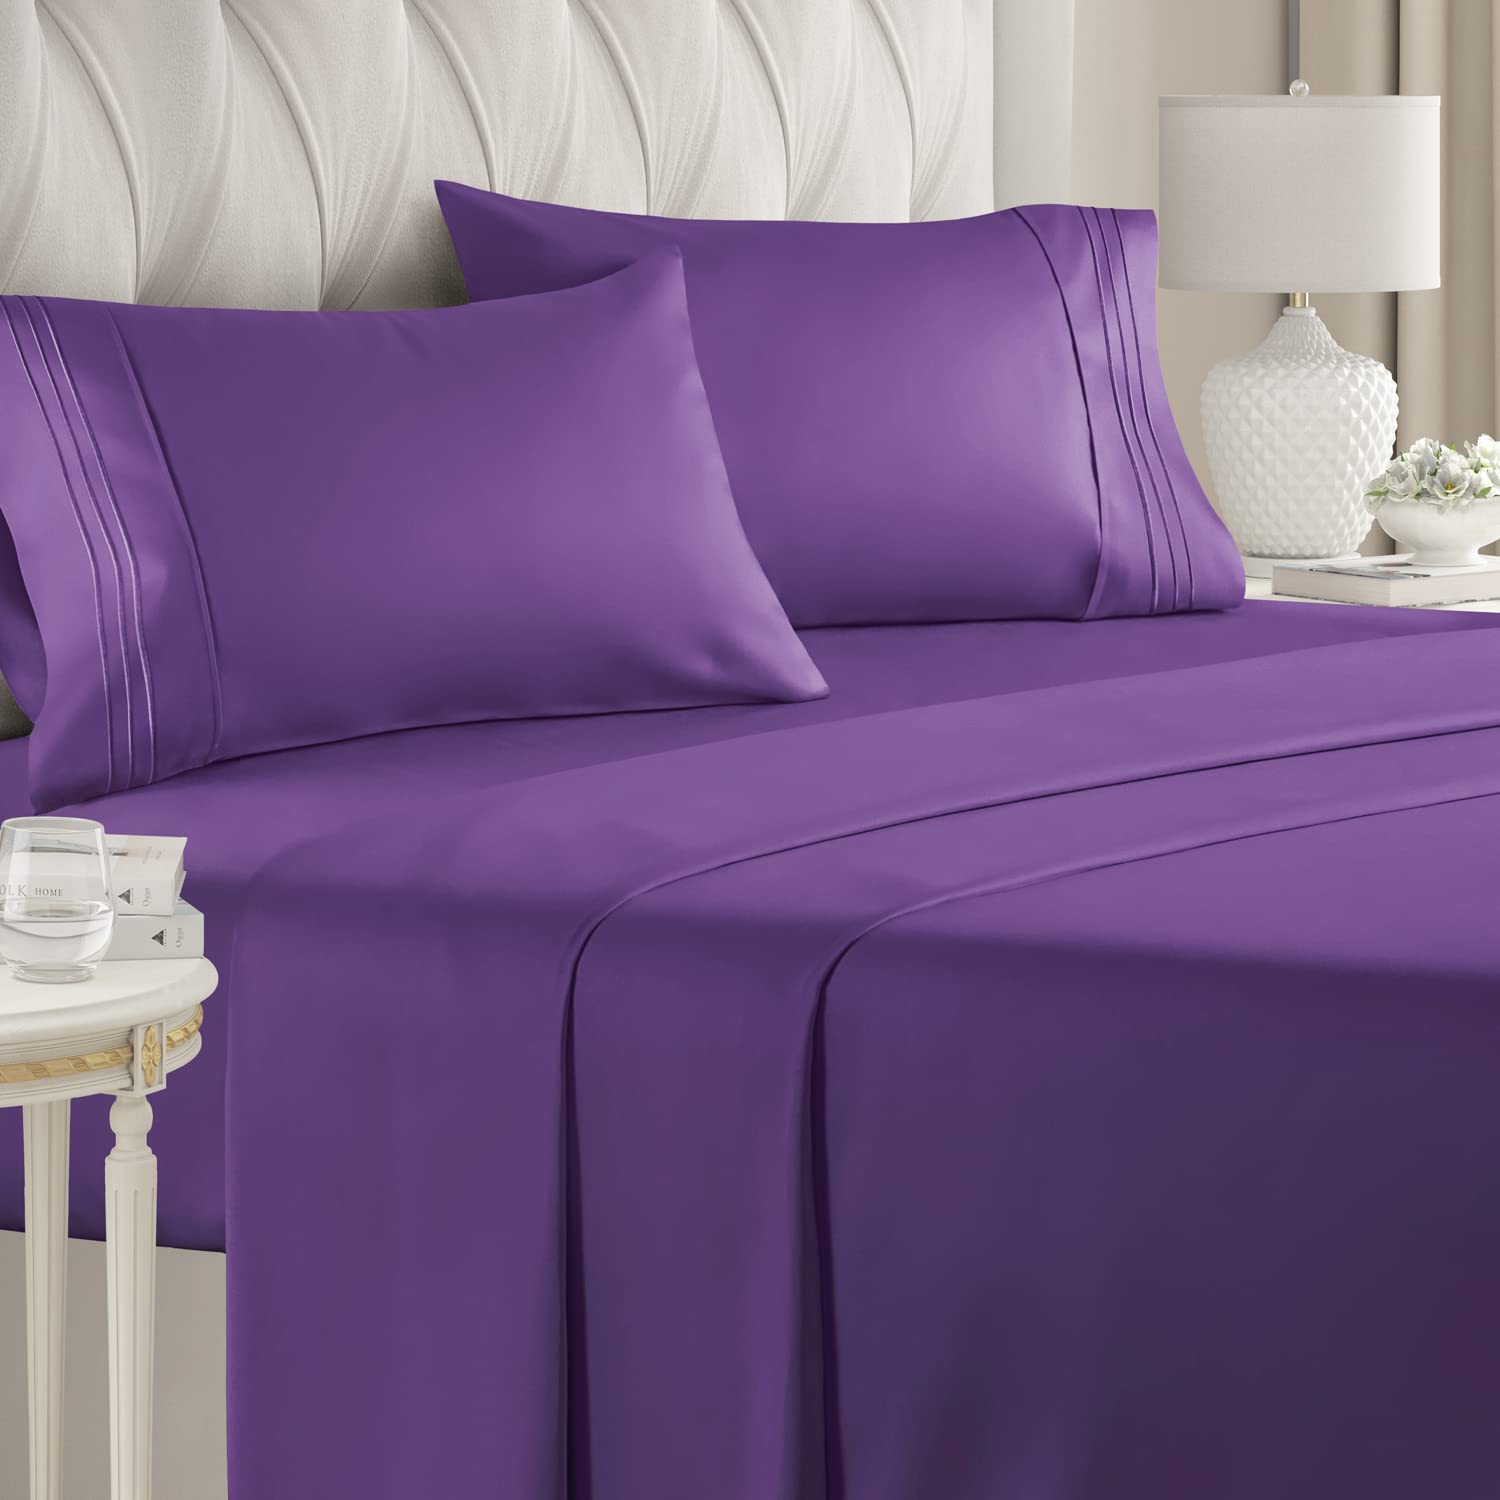 Book Cover Queen Size Sheet Set - Breathable & Cooling Sheets - Hotel Luxury Bed Sheets - Extra Soft - Deep Pockets - Easy Fit - 4 Piece Set - Wrinkle Free - Comfy – Purple Plum Bed Sheets - Queens Sheets – 4 PC 37 - Purple Queen